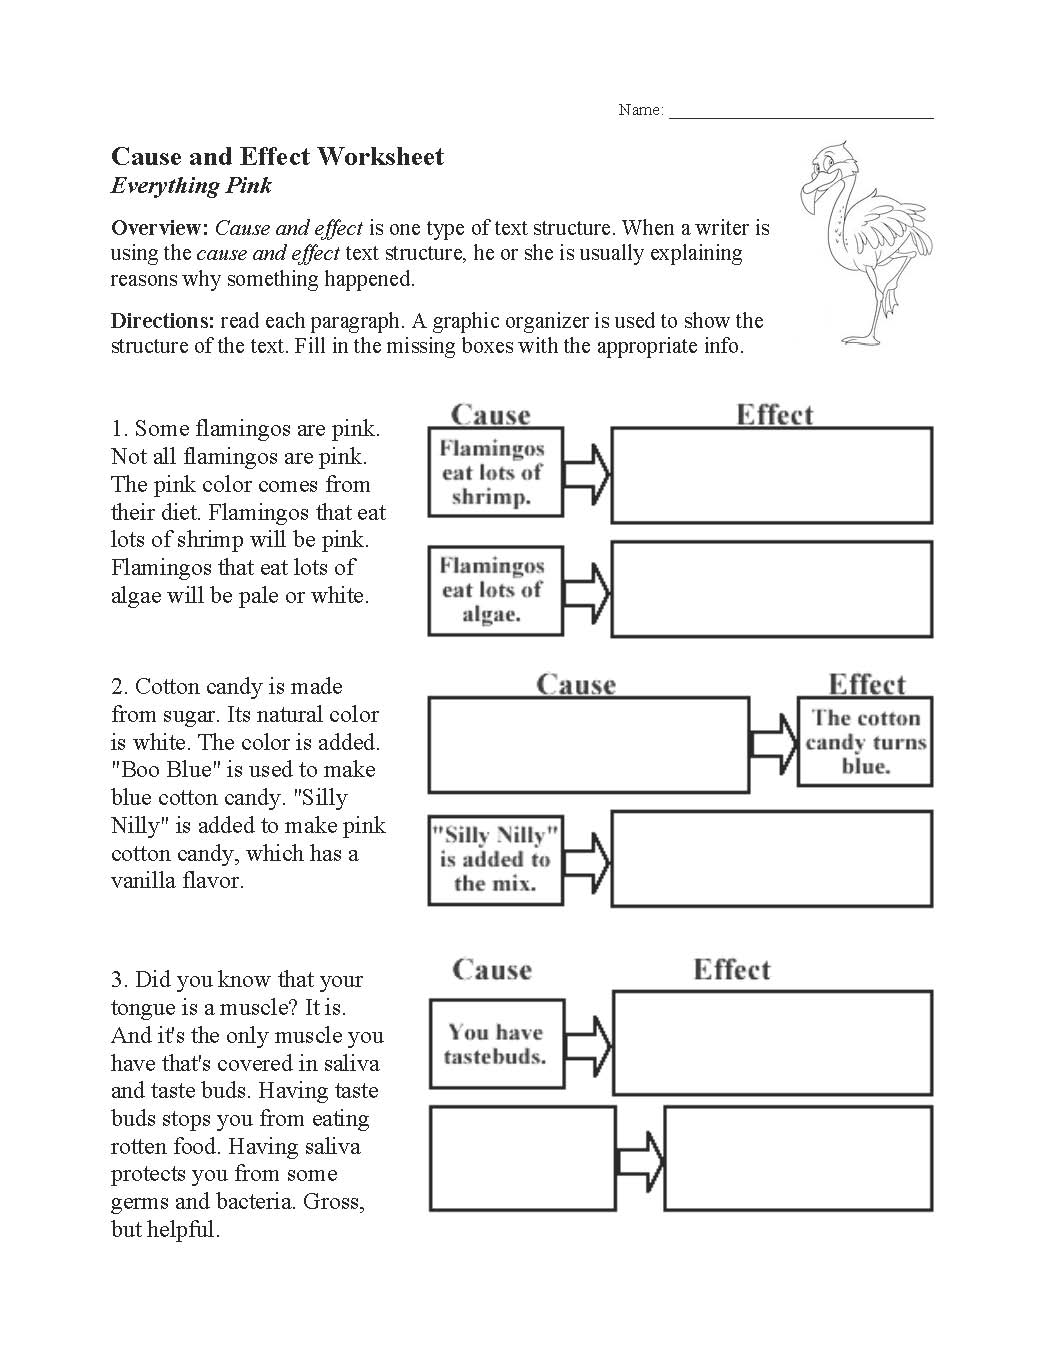 This is a preview image of one of our Reading Worksheets. Click on it to view all of our text structure worksheets.